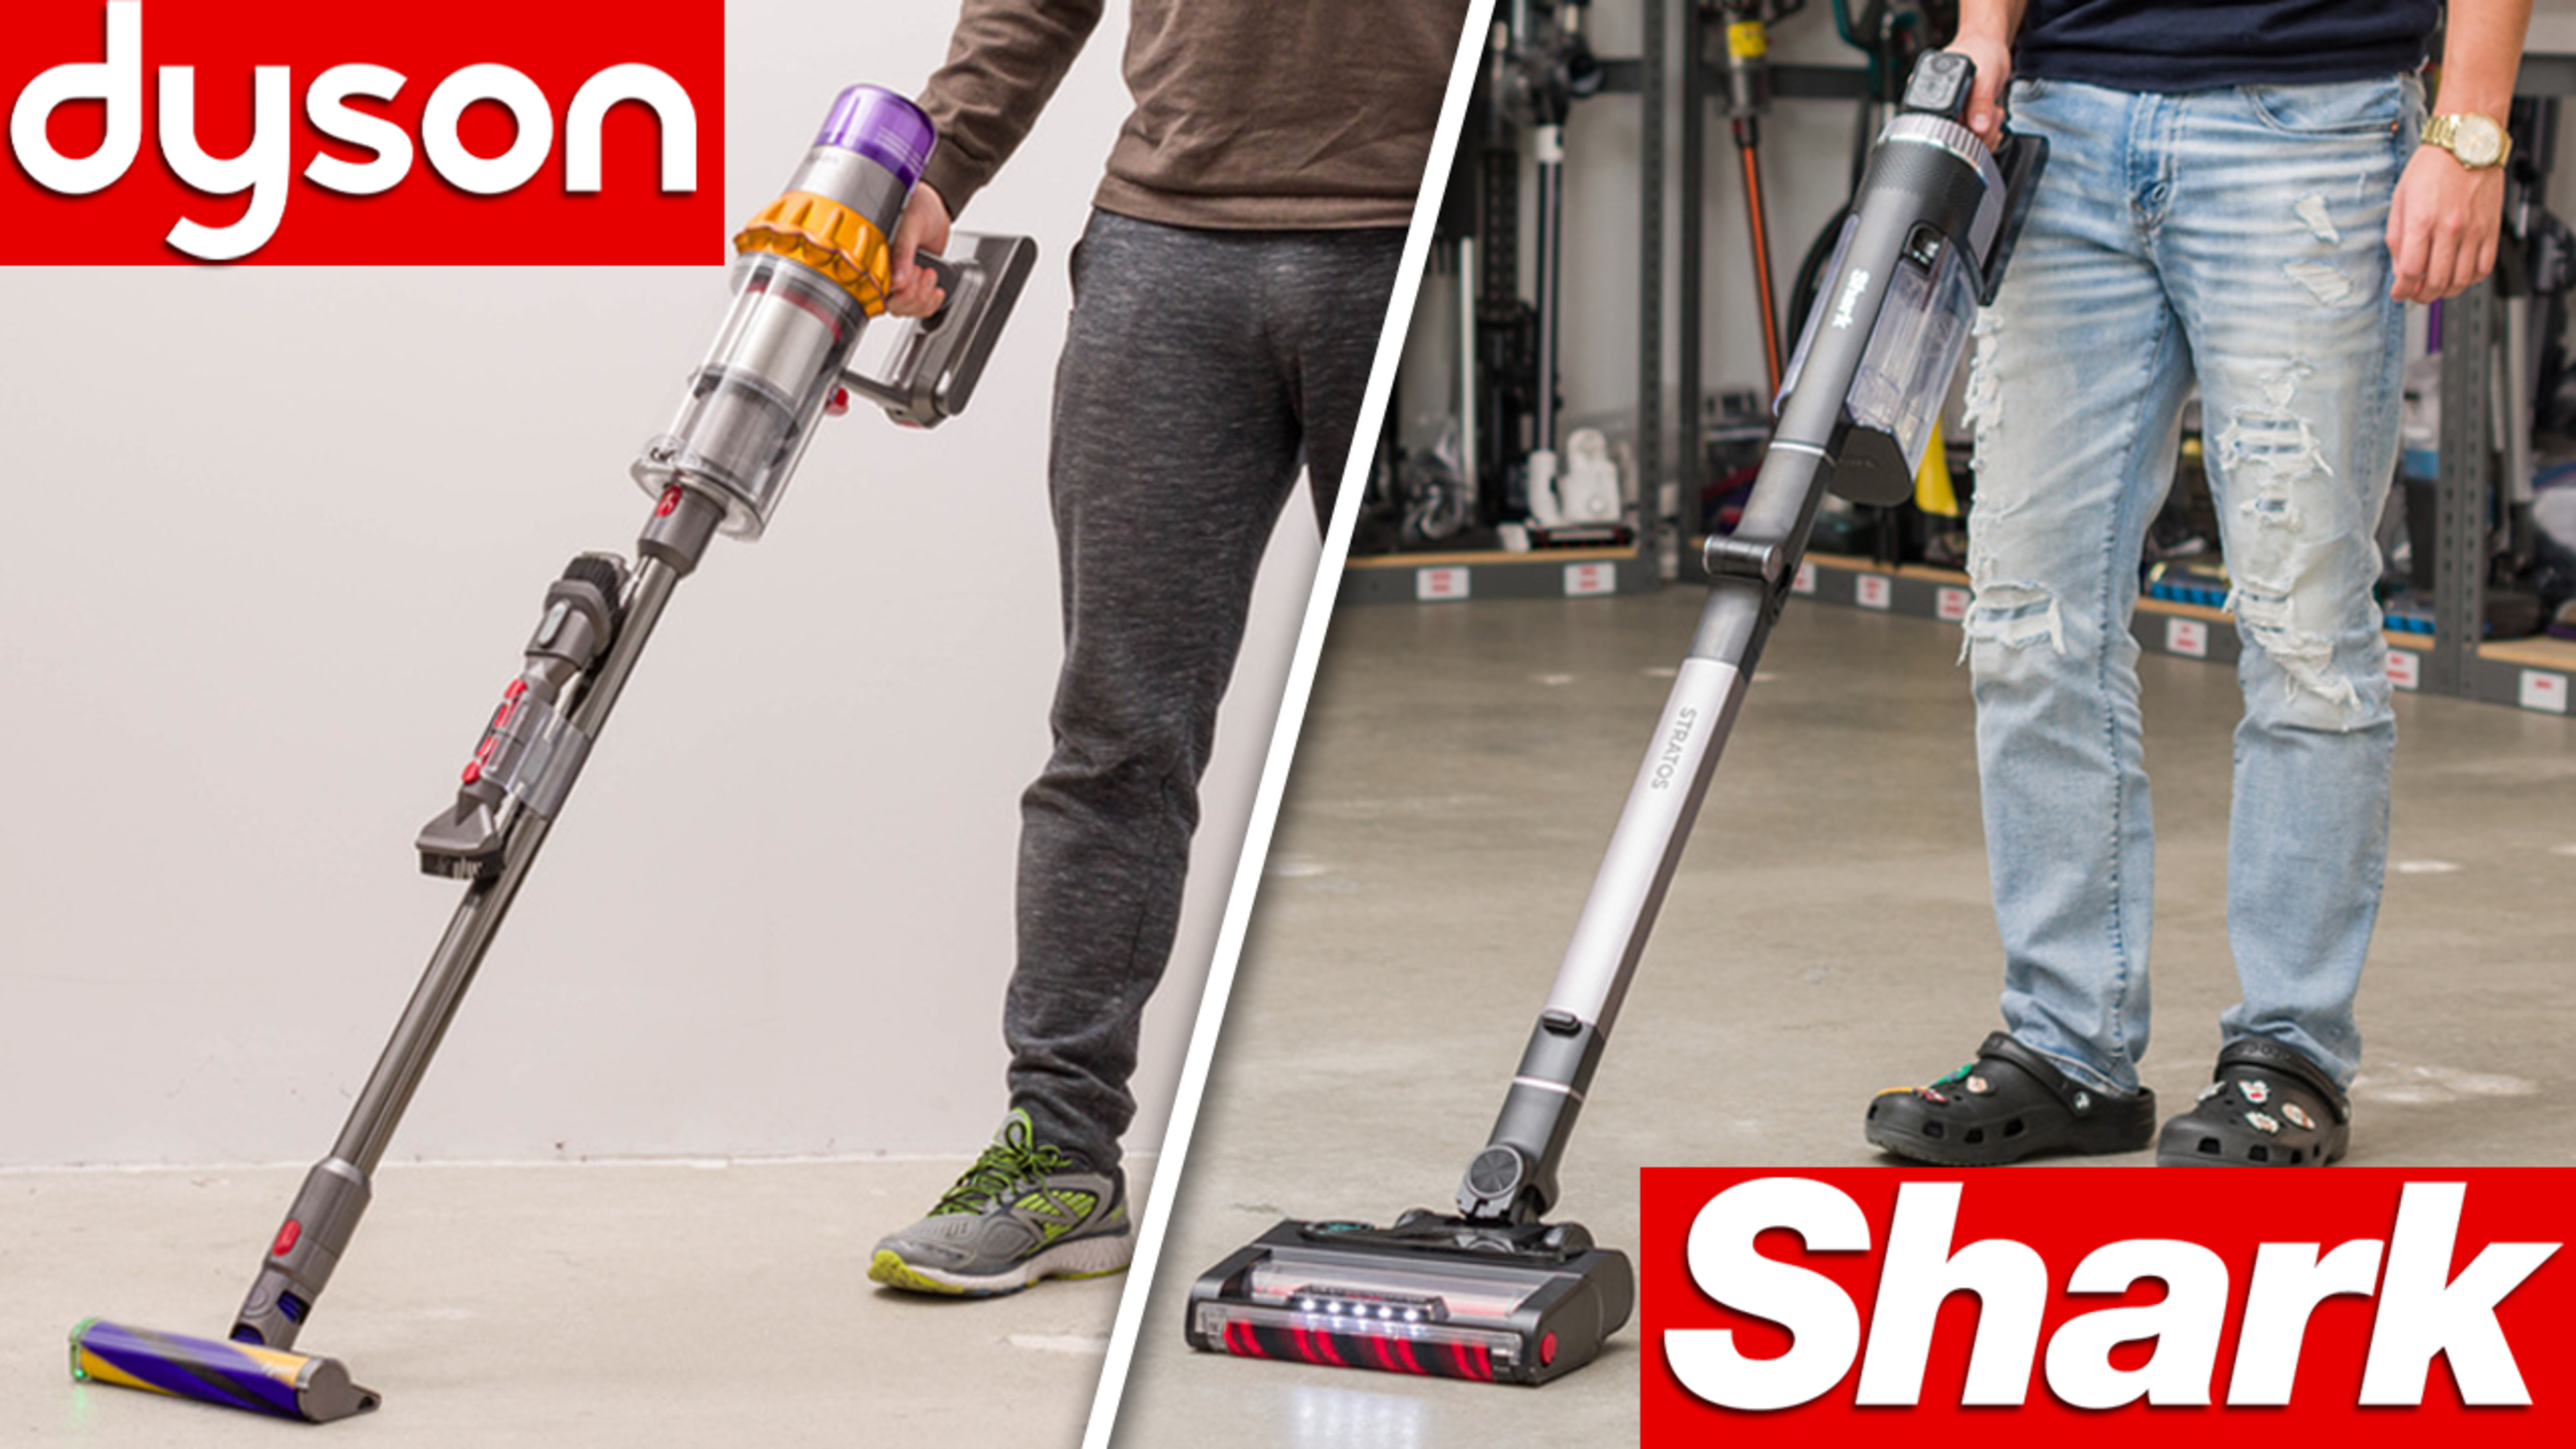 Dyson Shark Vacuums: Bought, Tested, - RTINGS.com